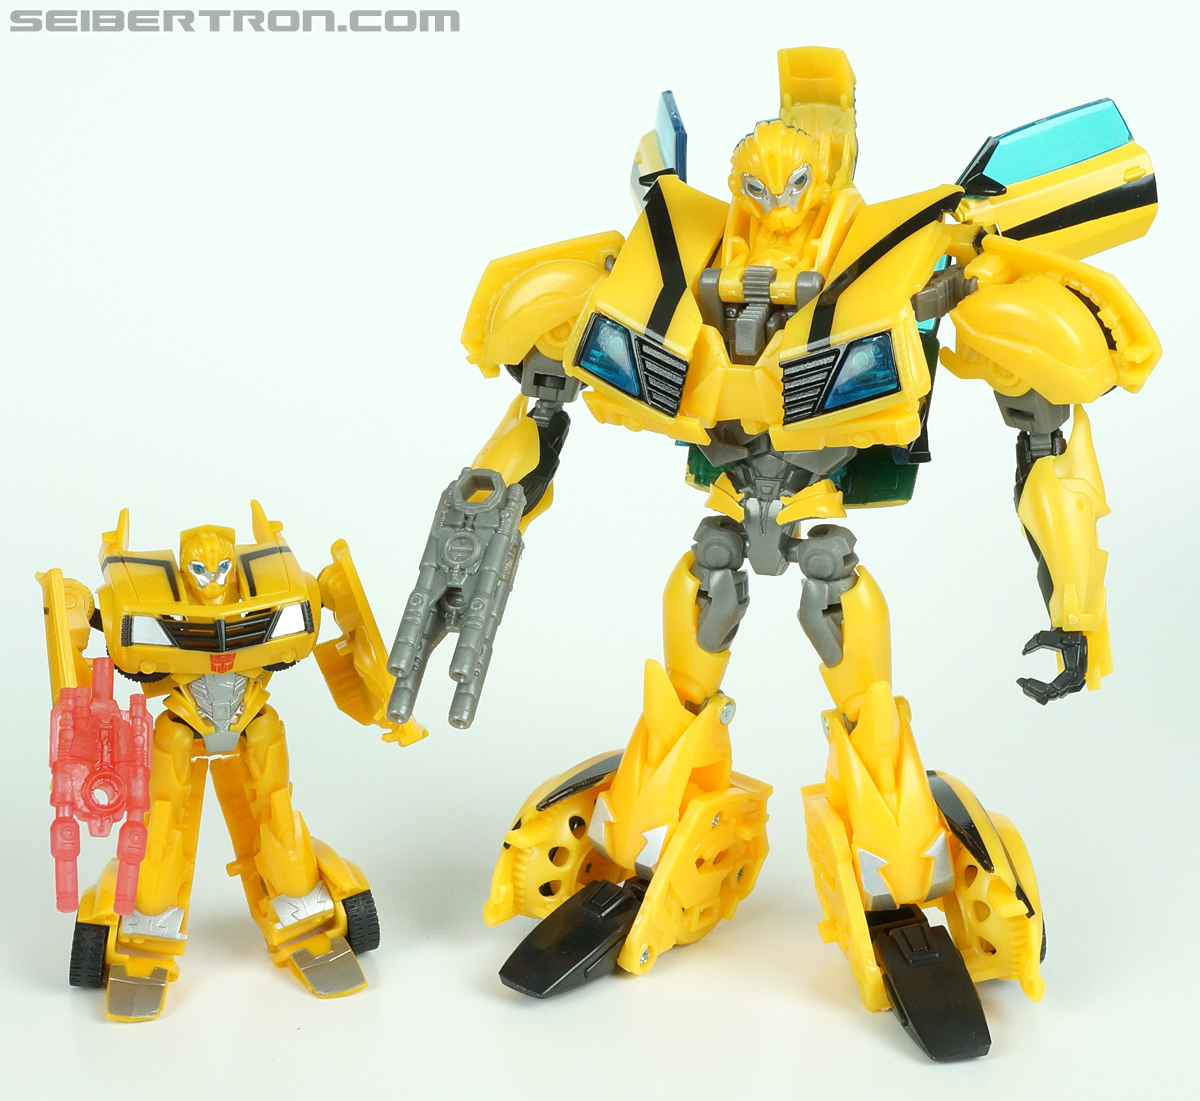 Transformers Prime: Cyberverse Bumblebee (Image #106 of 110)